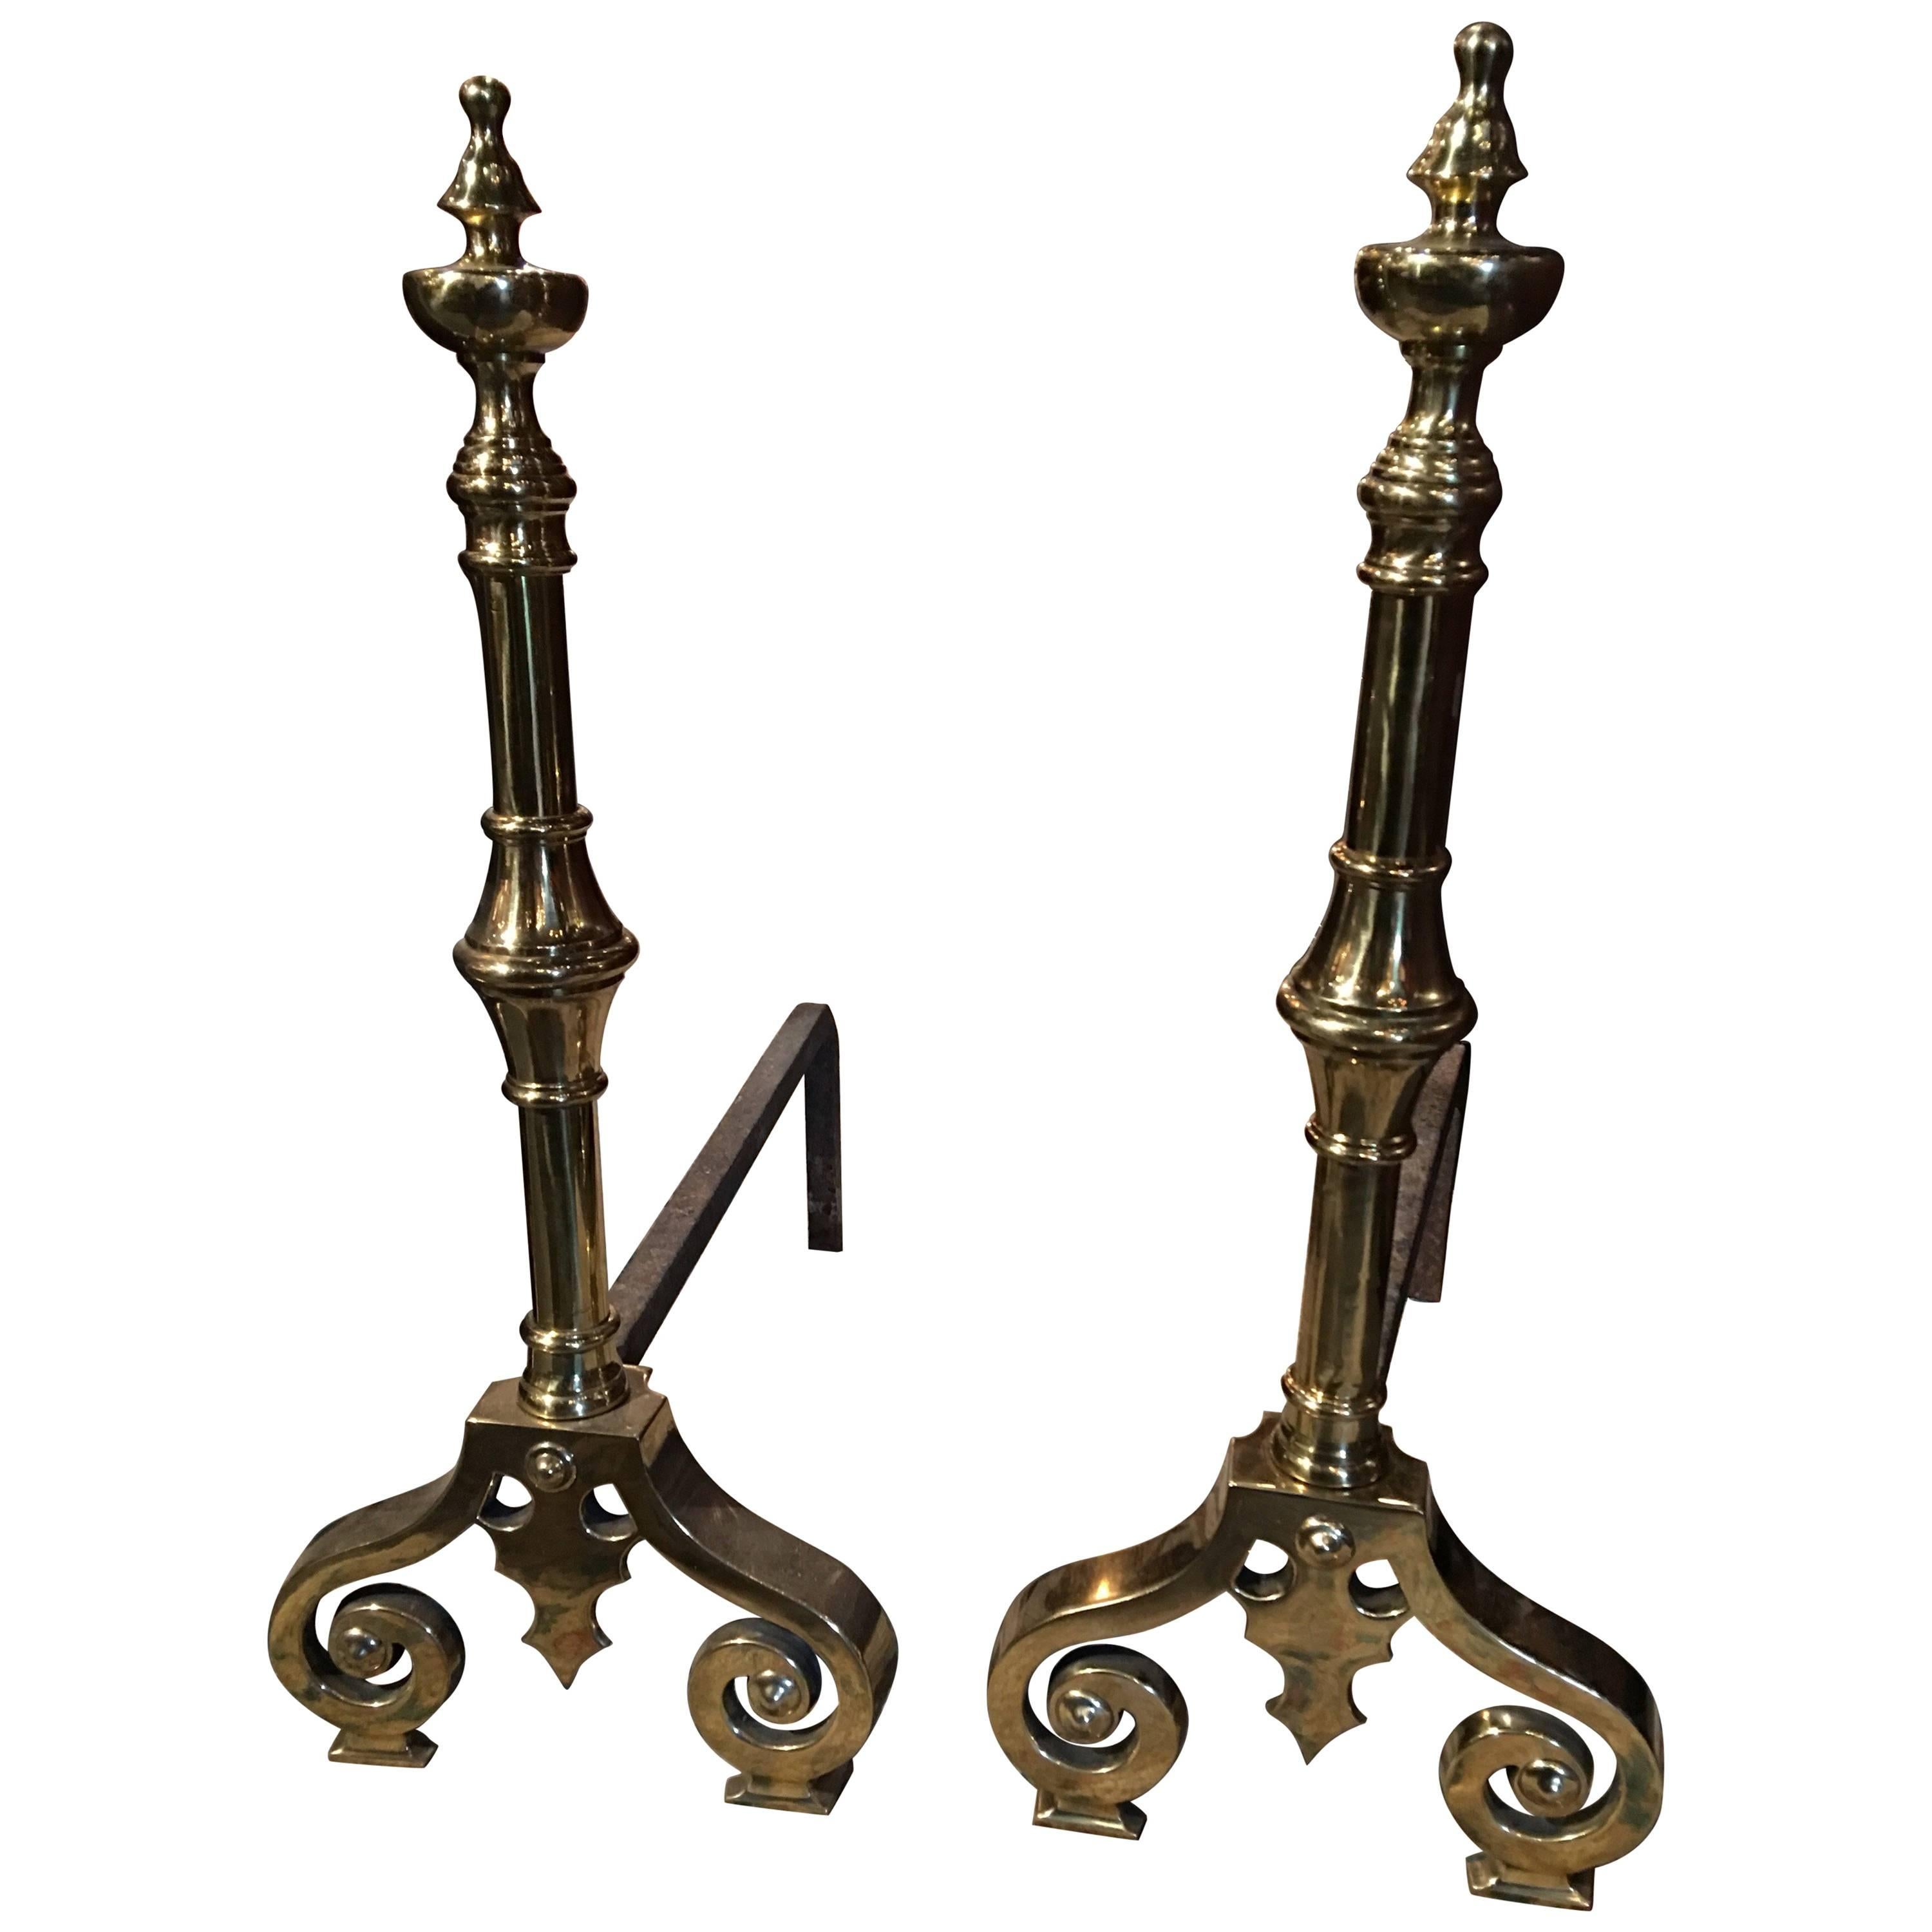 Pair of Polished Brass Chenets or Andirons with Decorative Scrolls, 19th Century